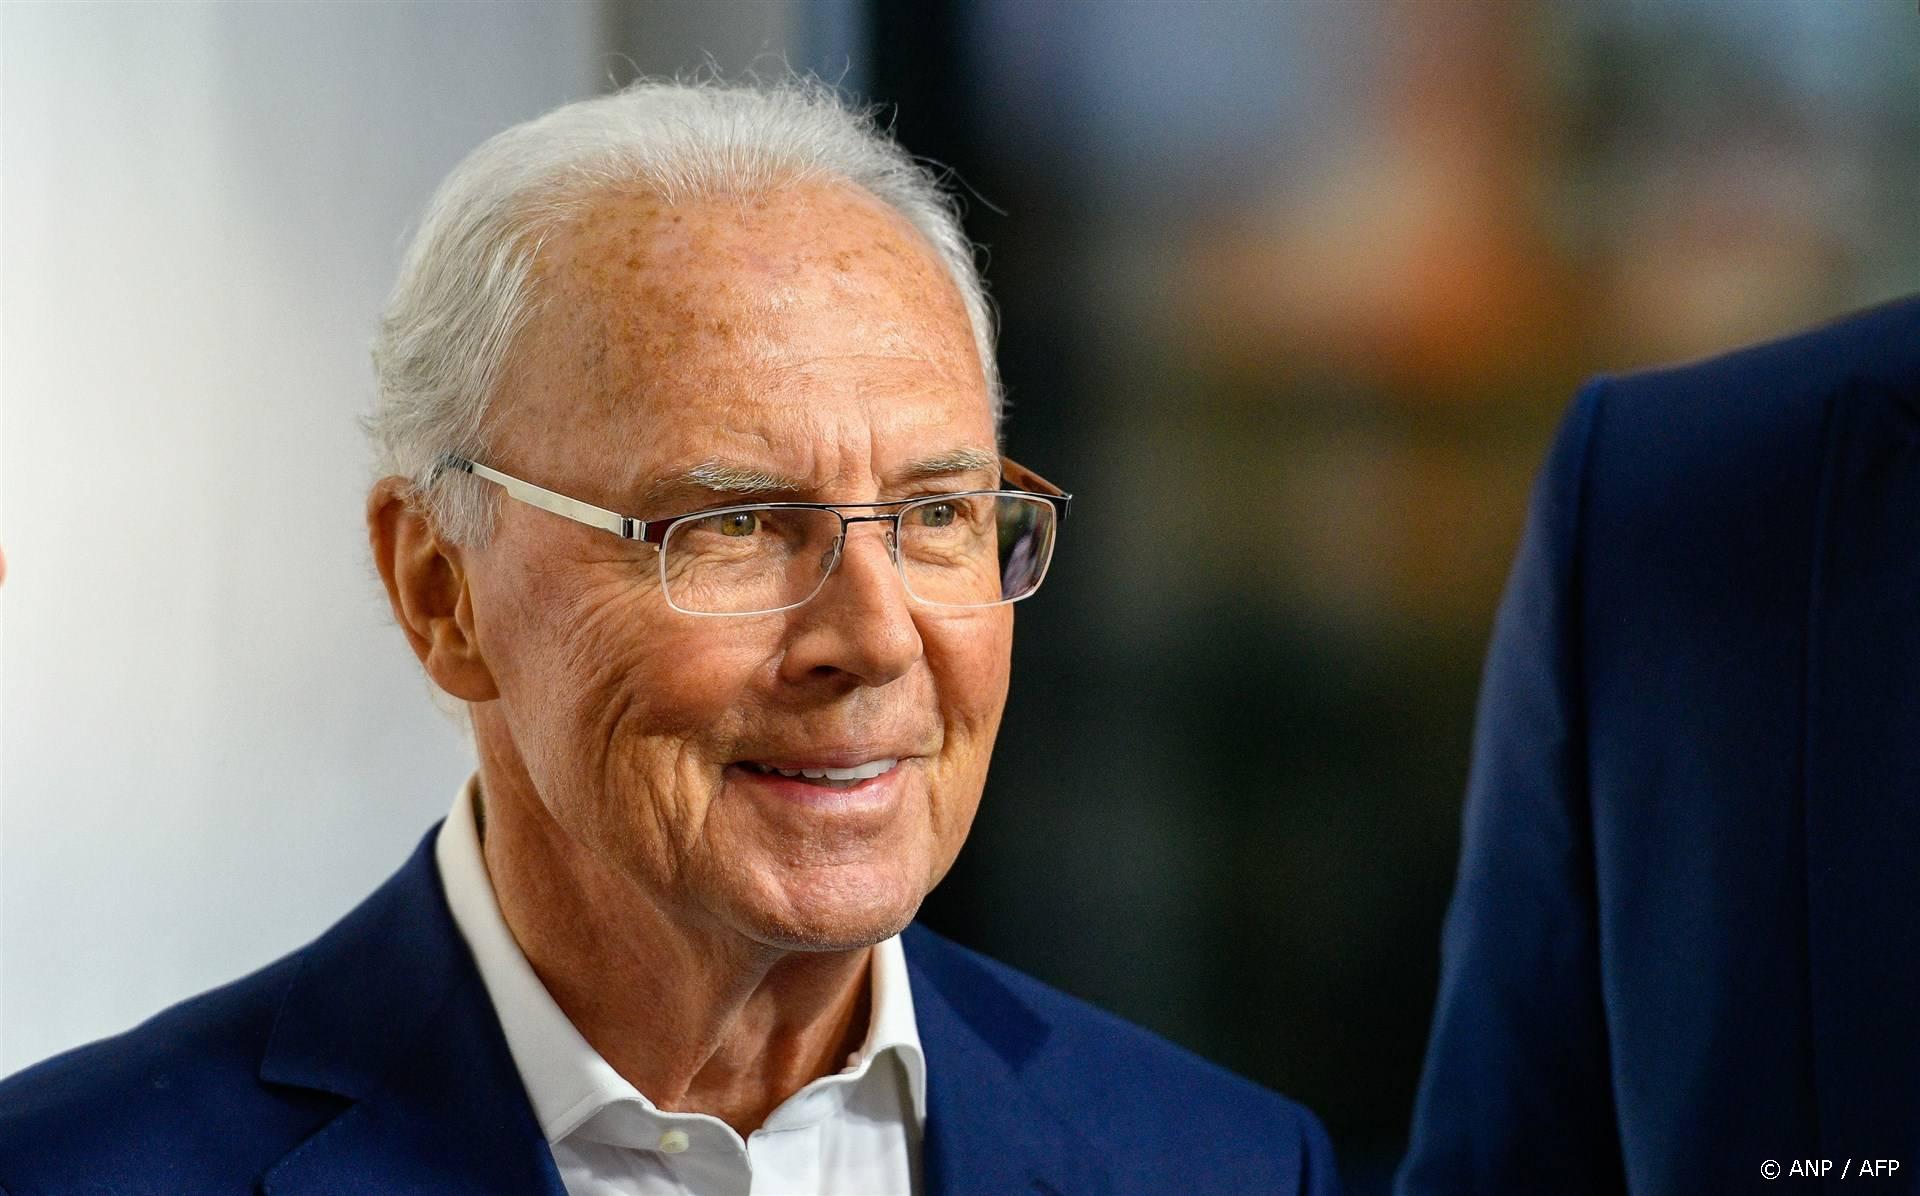 Former German player Franz Beckenbauer arrives for the opening gala for the Hall of Fame of German Football at the German Football Museum in Dortmund on April 1, 2019. 
SASCHA SCHUERMANN / AFP